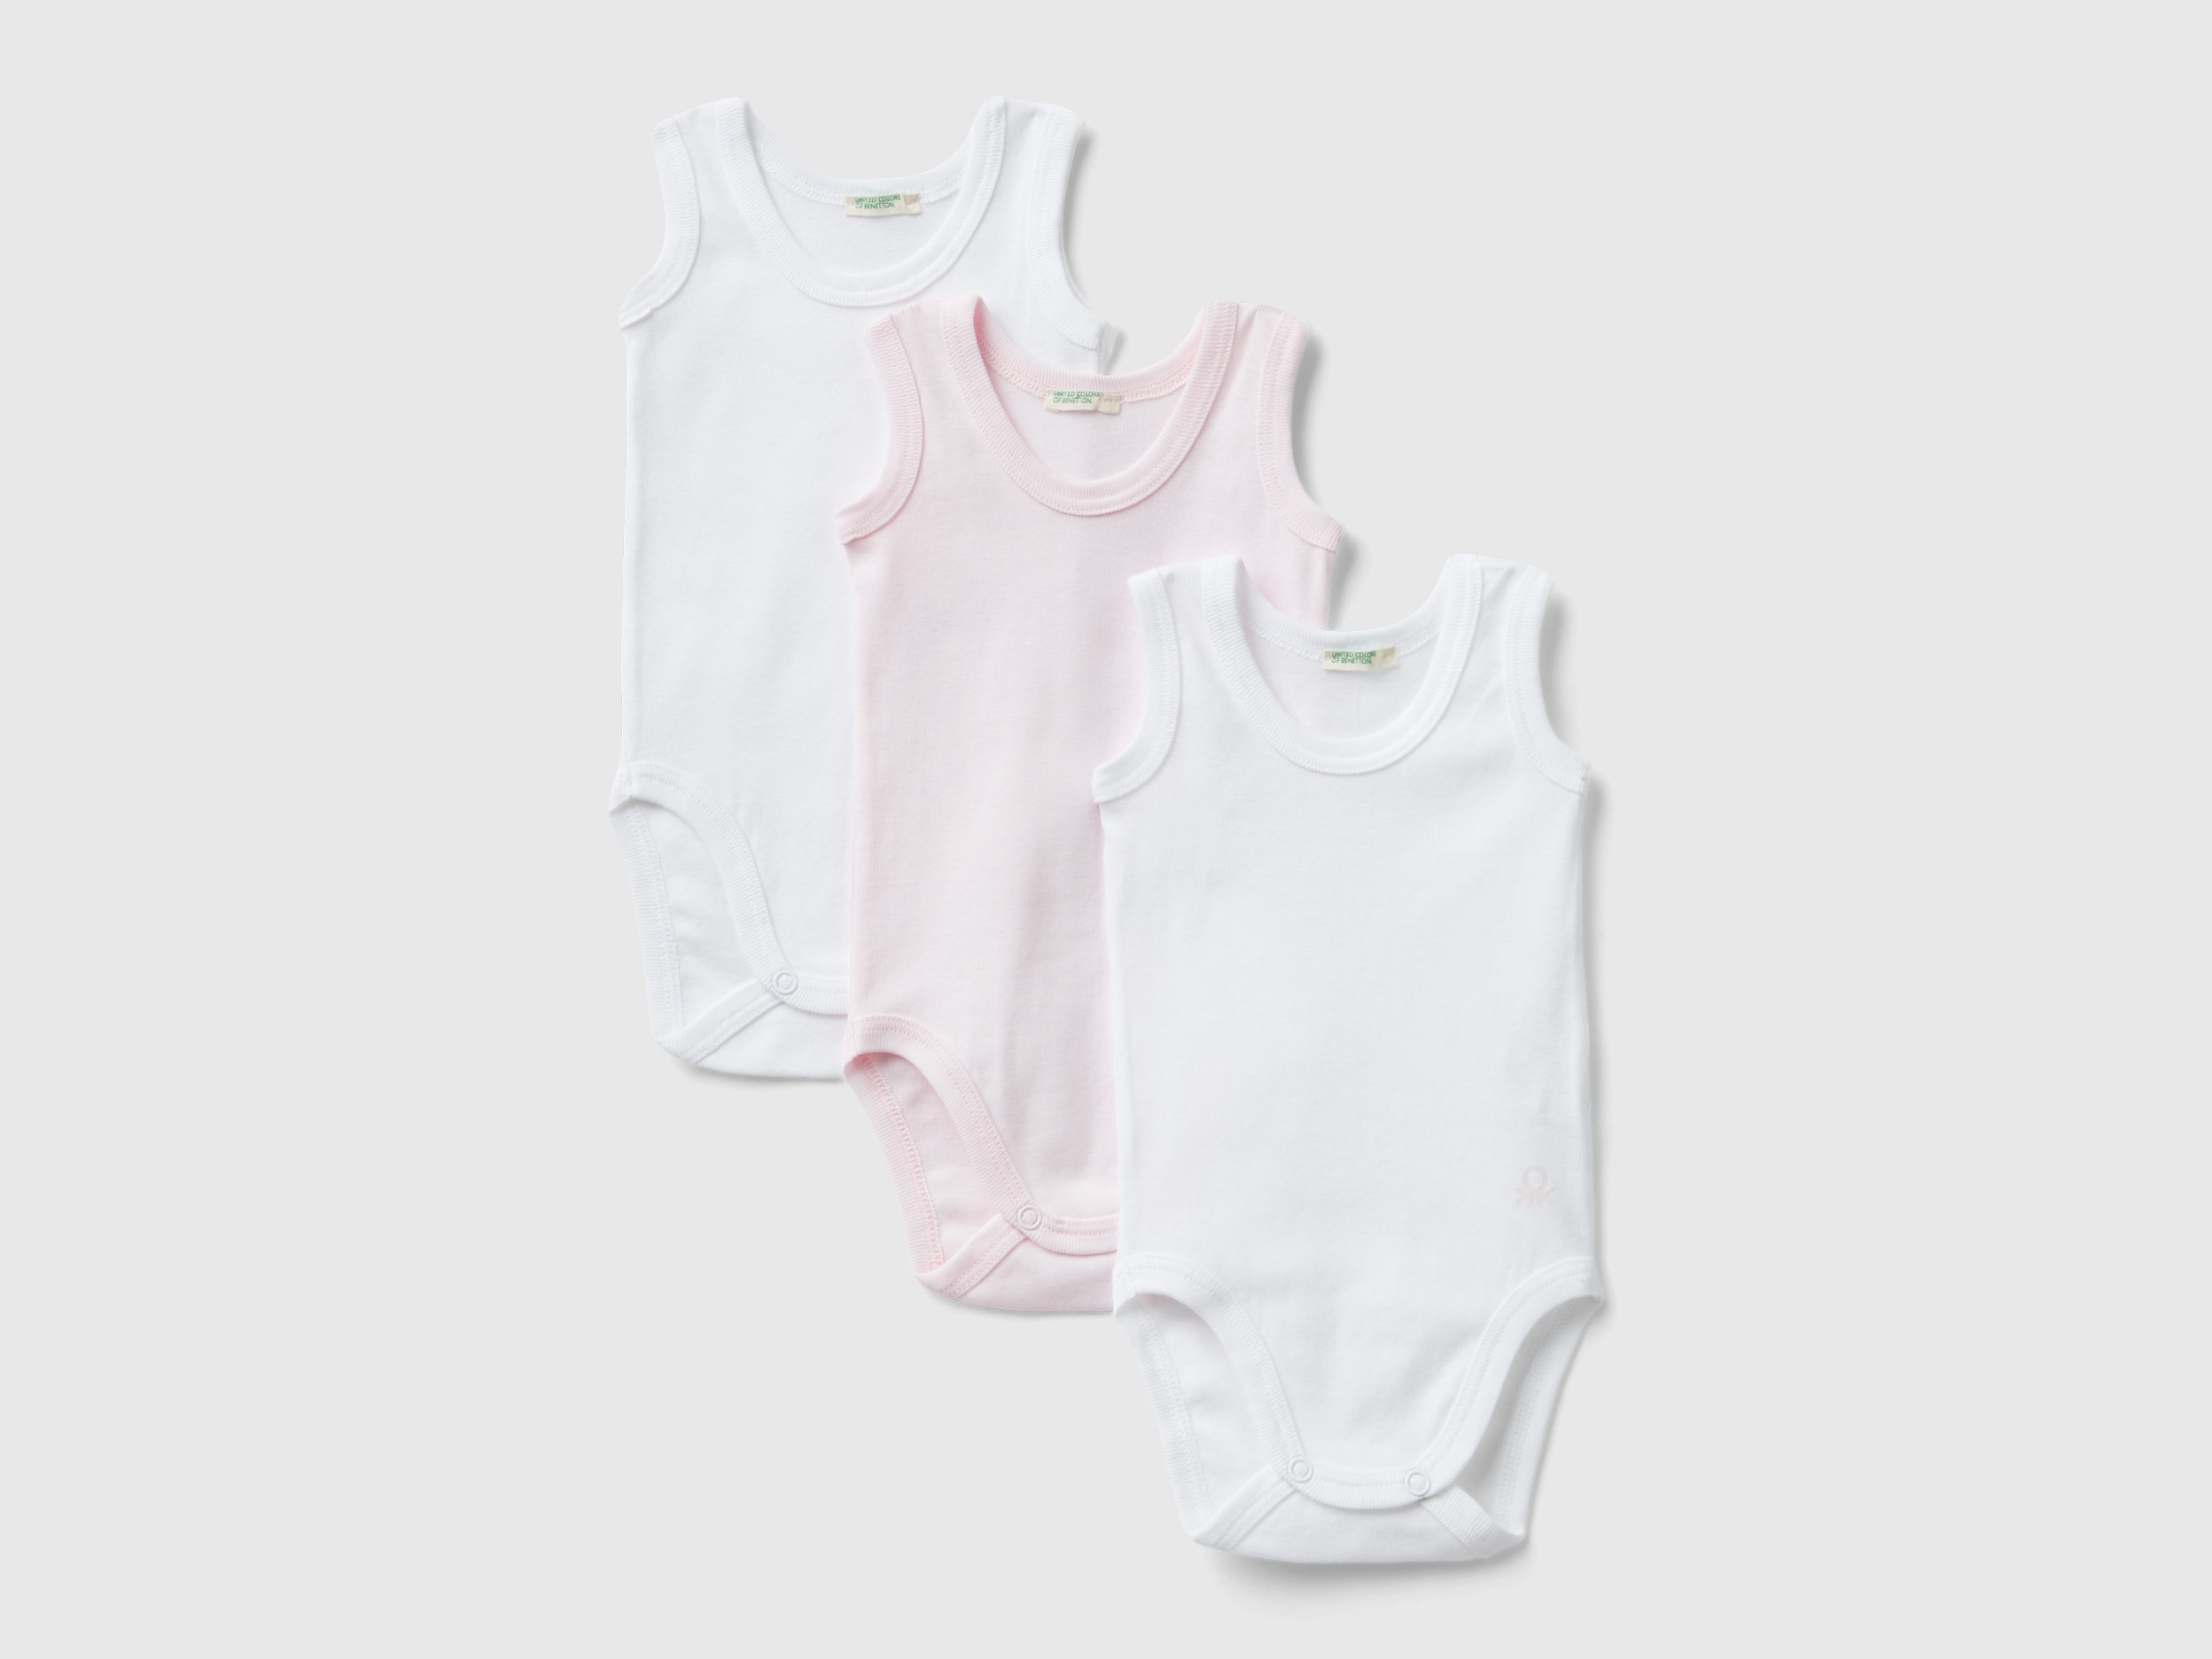 Image of Benetton, Three Solid Colored Tank Top Bodysuits, size 62, Multi-color, Kids